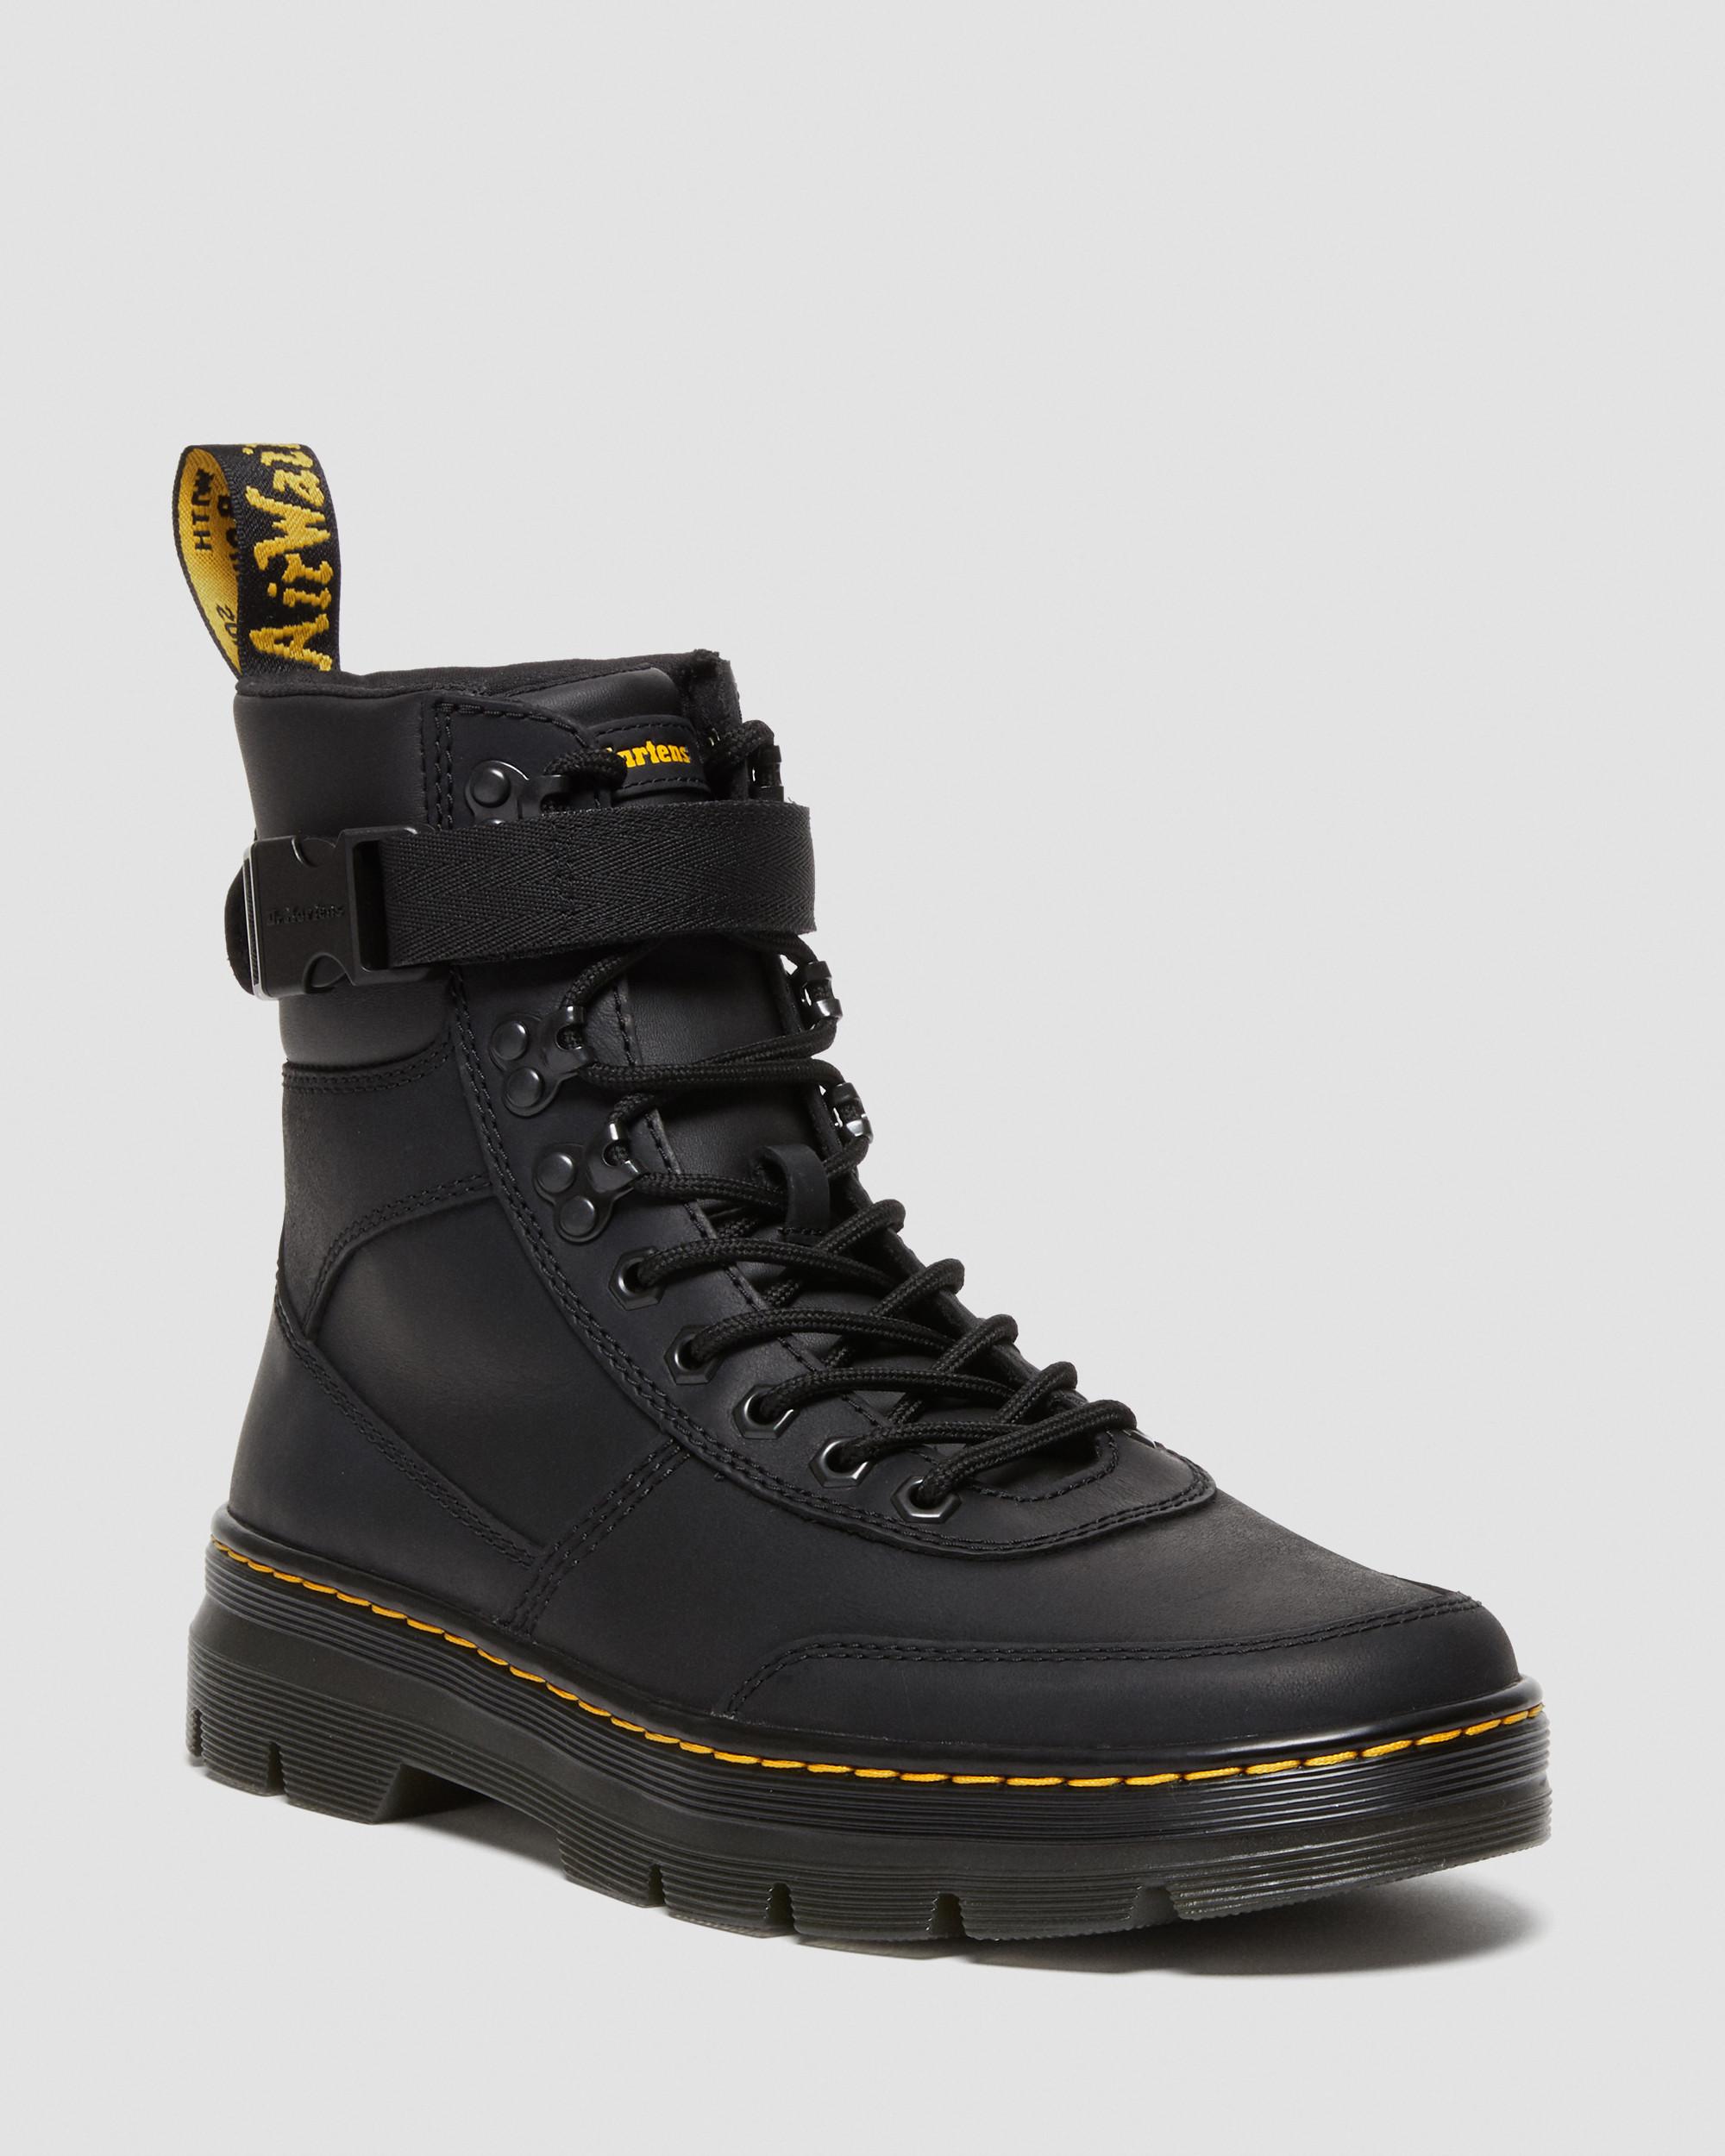 DR MARTENS Combs Tech II Wyoming Leather Utility Boots